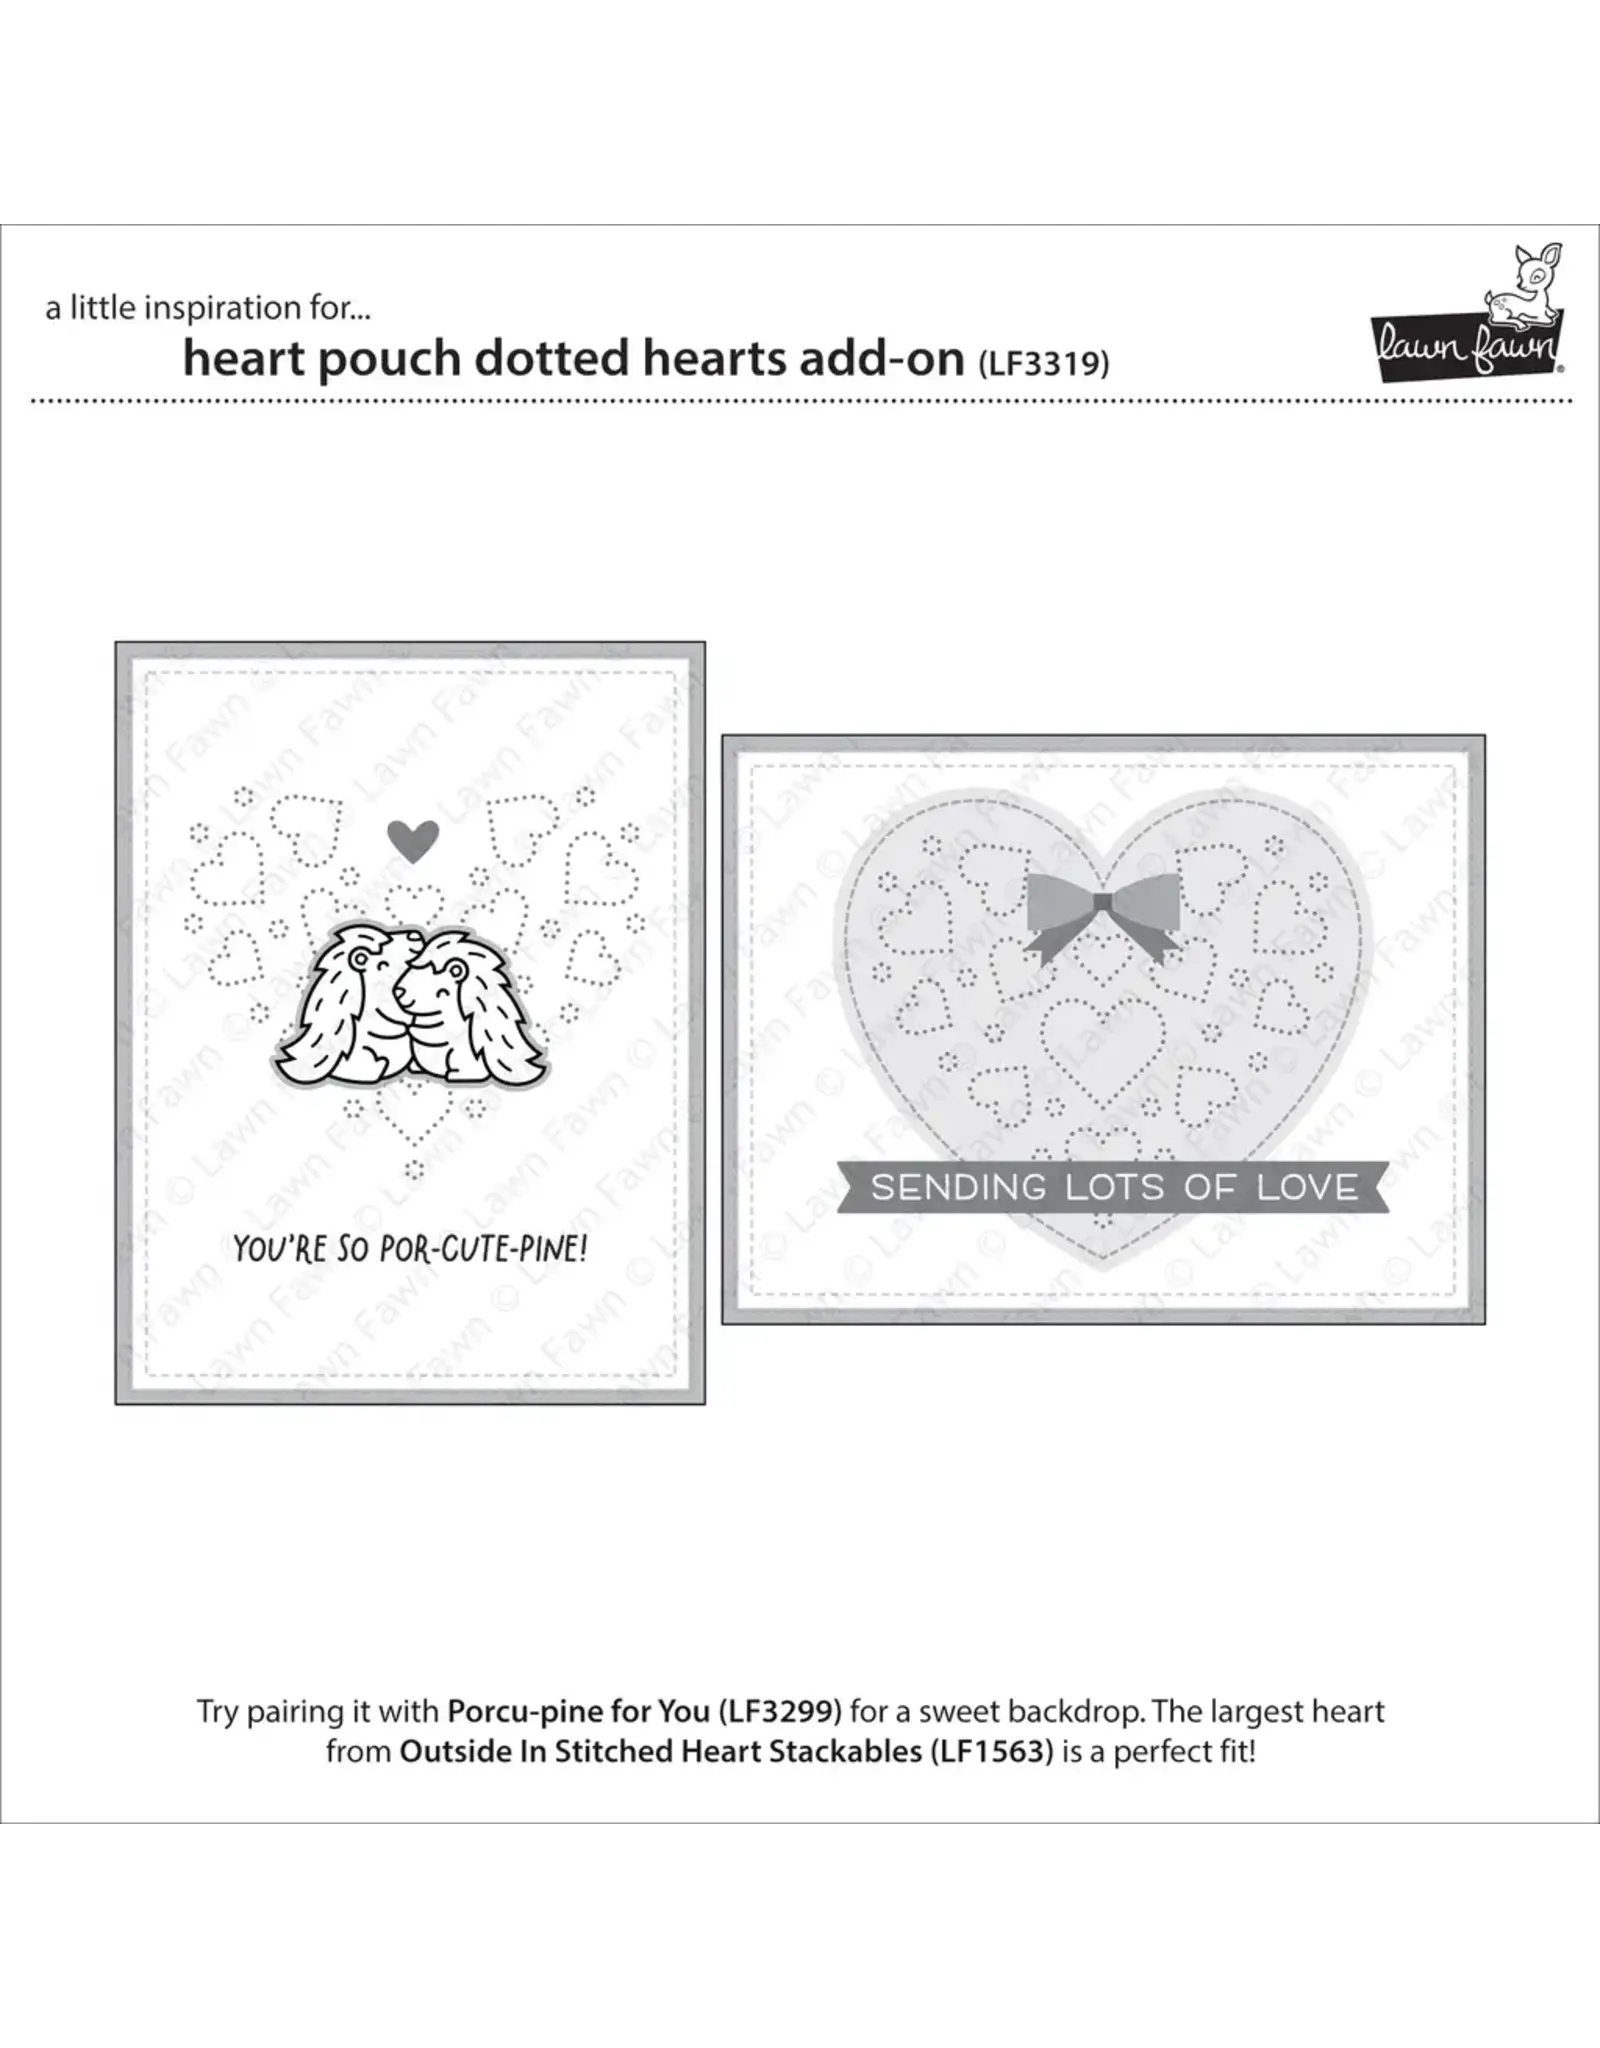 LAWN FAWN LAWN FAWN HEART POUCH DOTTED HEARTS ADD-ON DIE